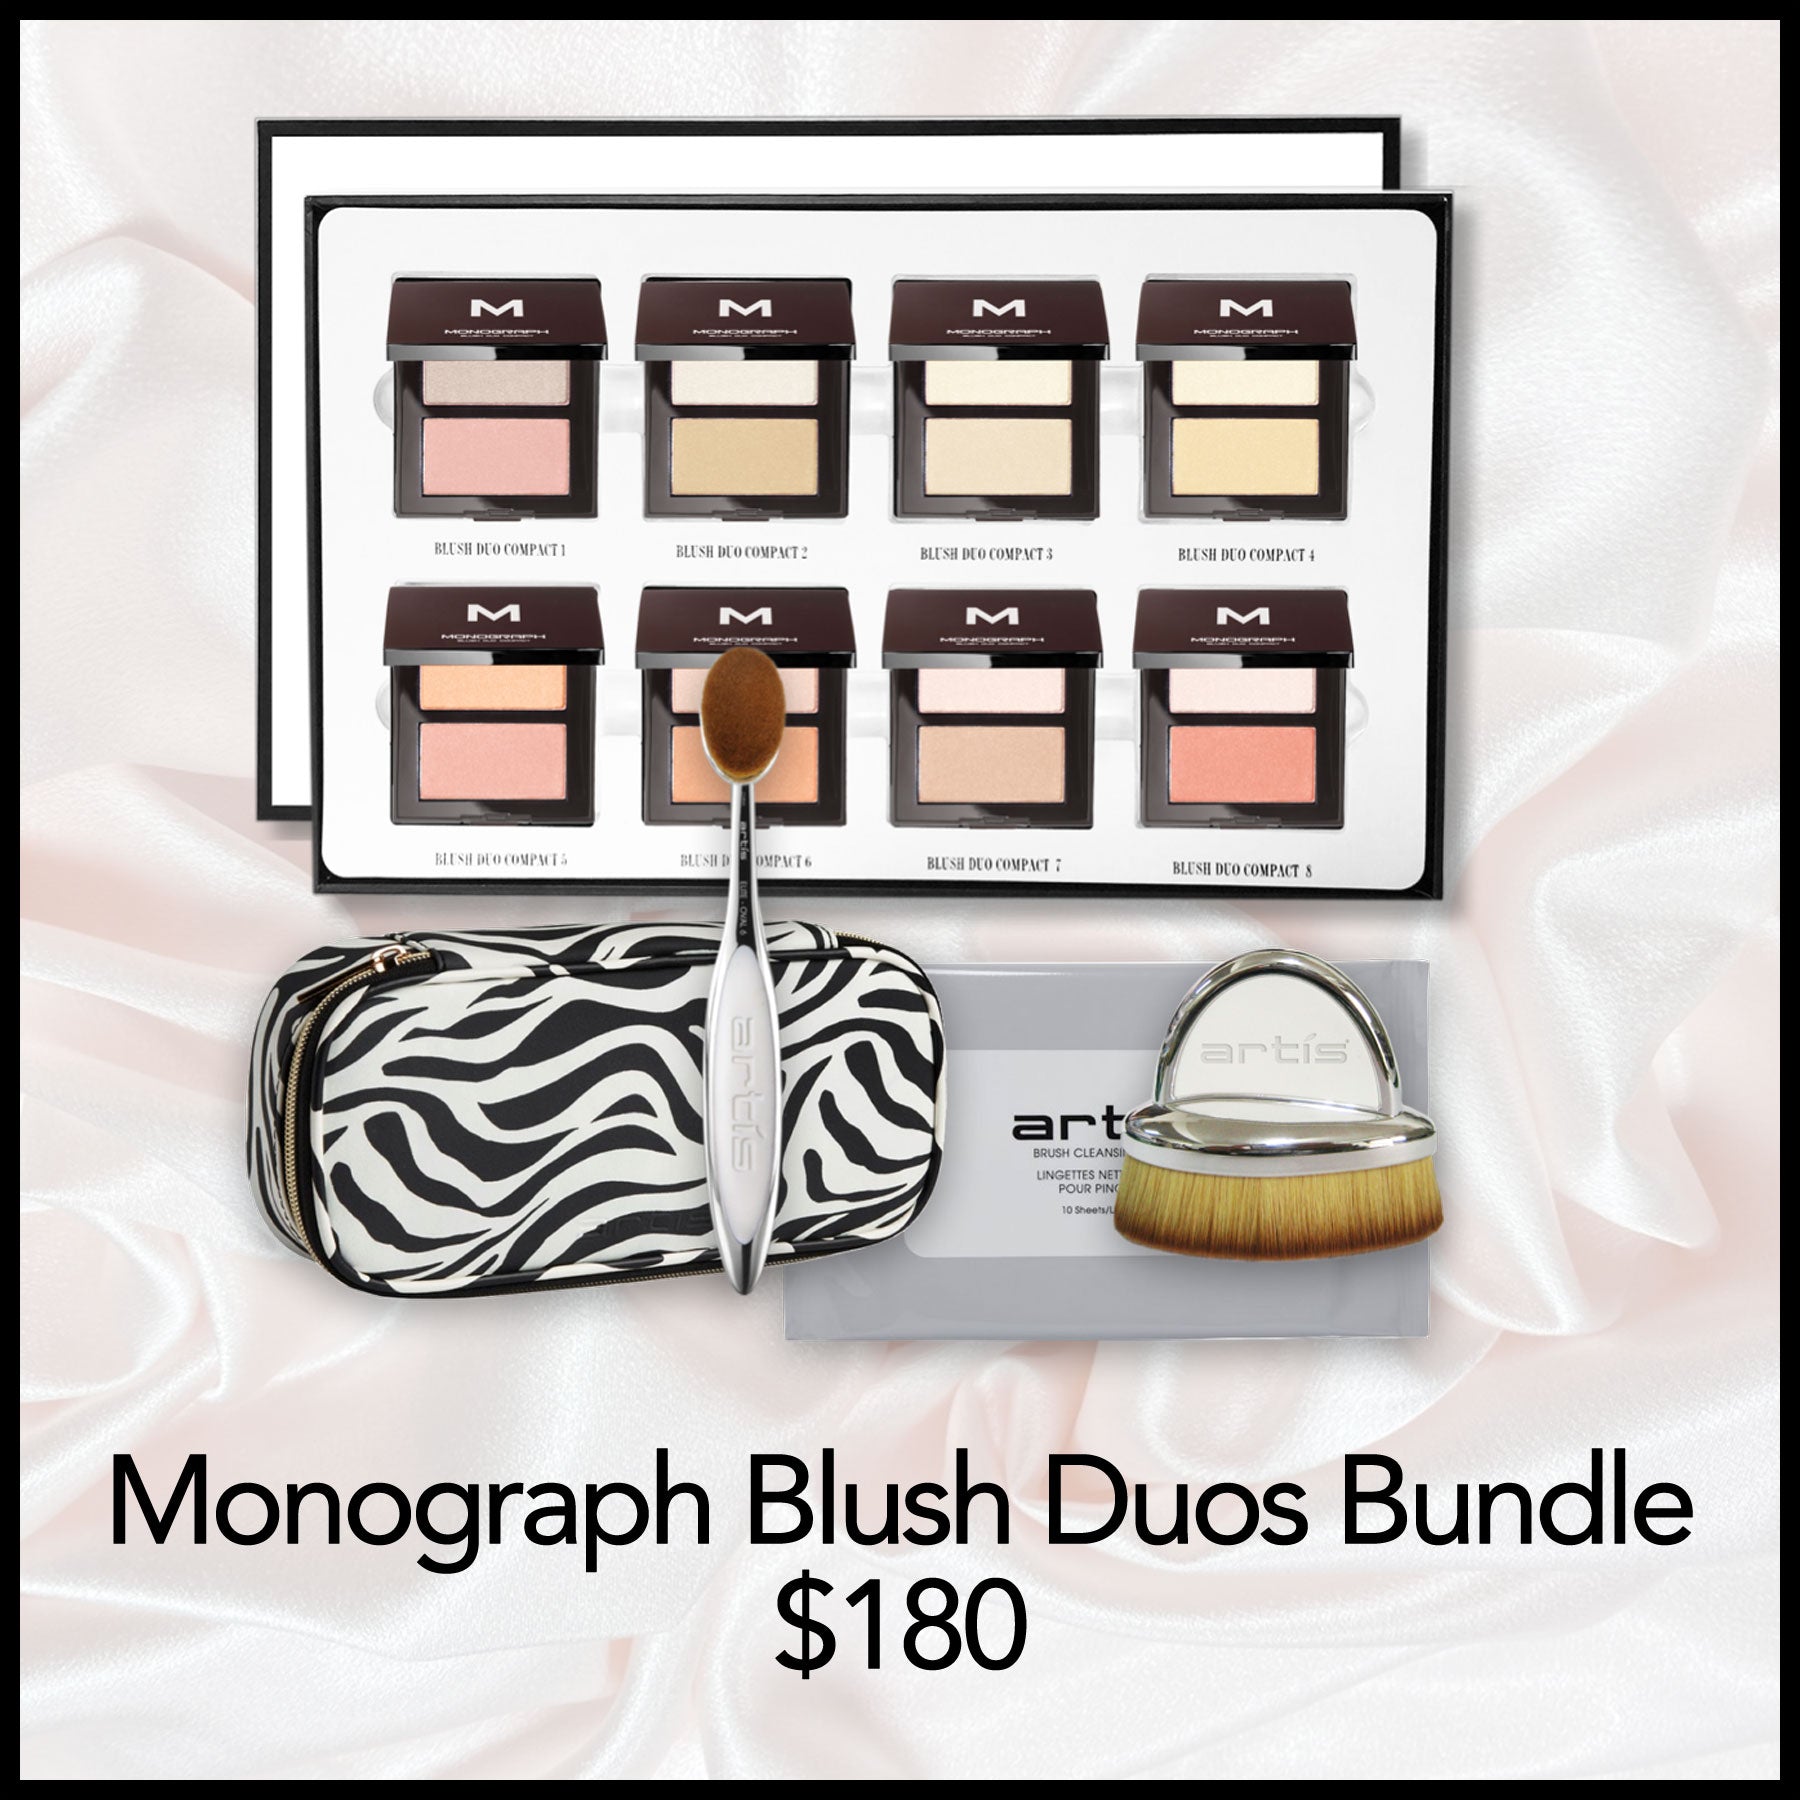 special monograph blush duos portfolio and elite brushes and product bundle for $180